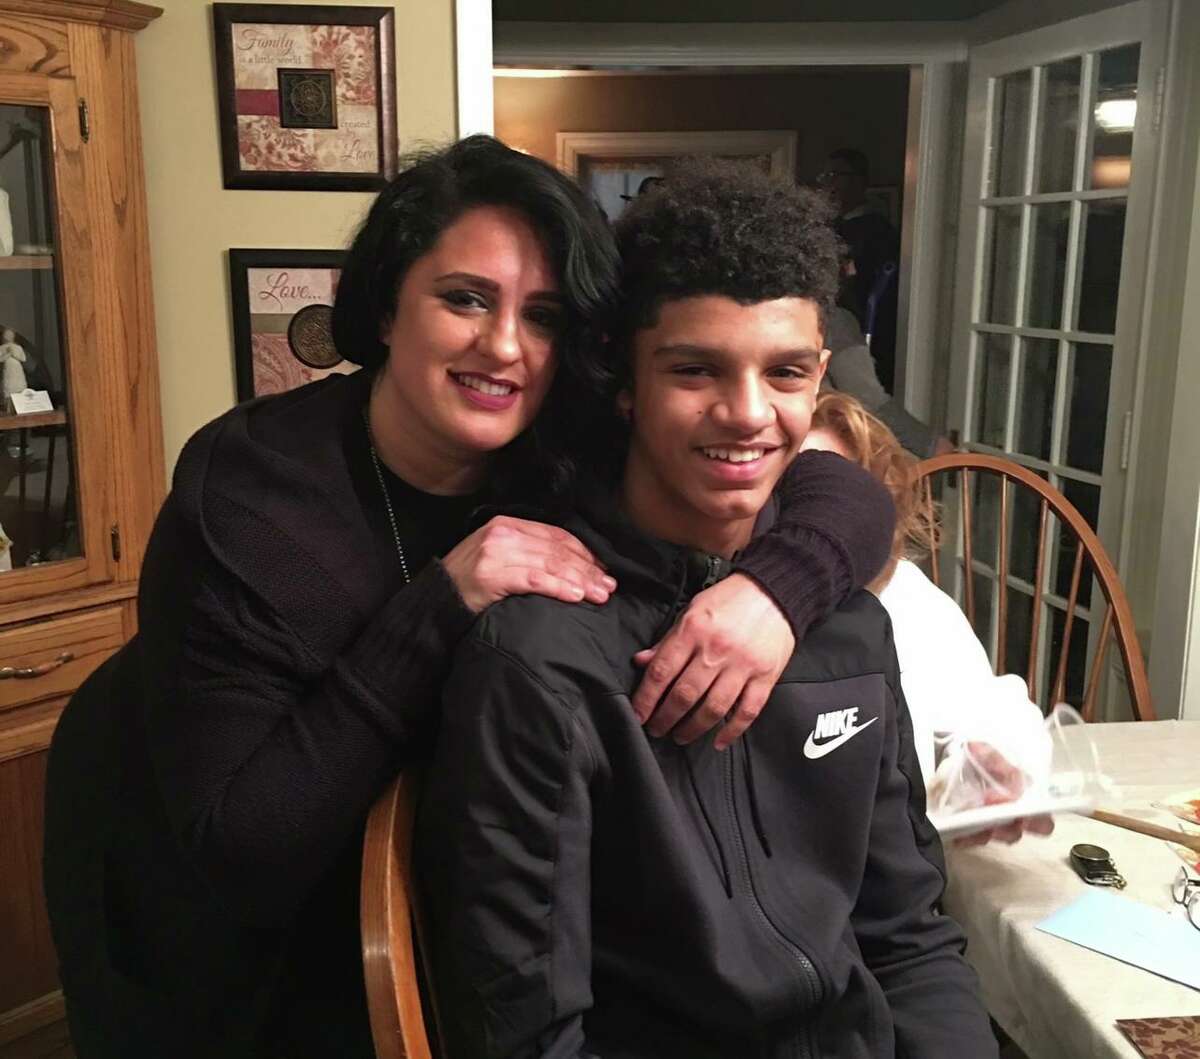 UConn men's basketball sophomore Andre Jackson as a teen with his mother, Tricia Altieri.